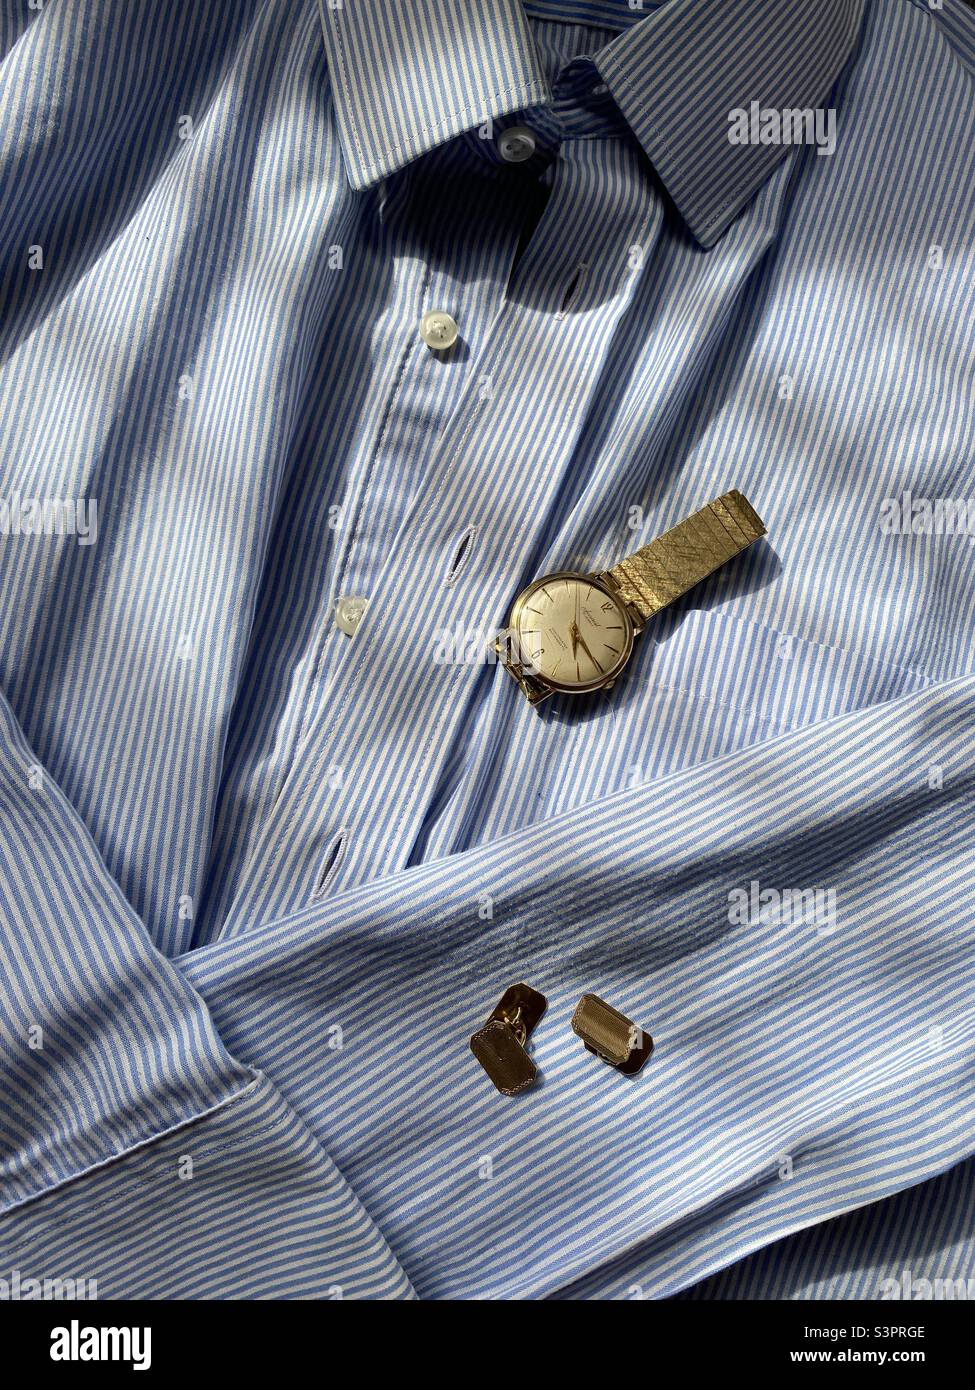 Gentlemen’s elegant blue and white striped shirt with two accessories - a gold wrist watch and gold cuff links - all laid out in the afternoon sun ready to use. Stock Photo